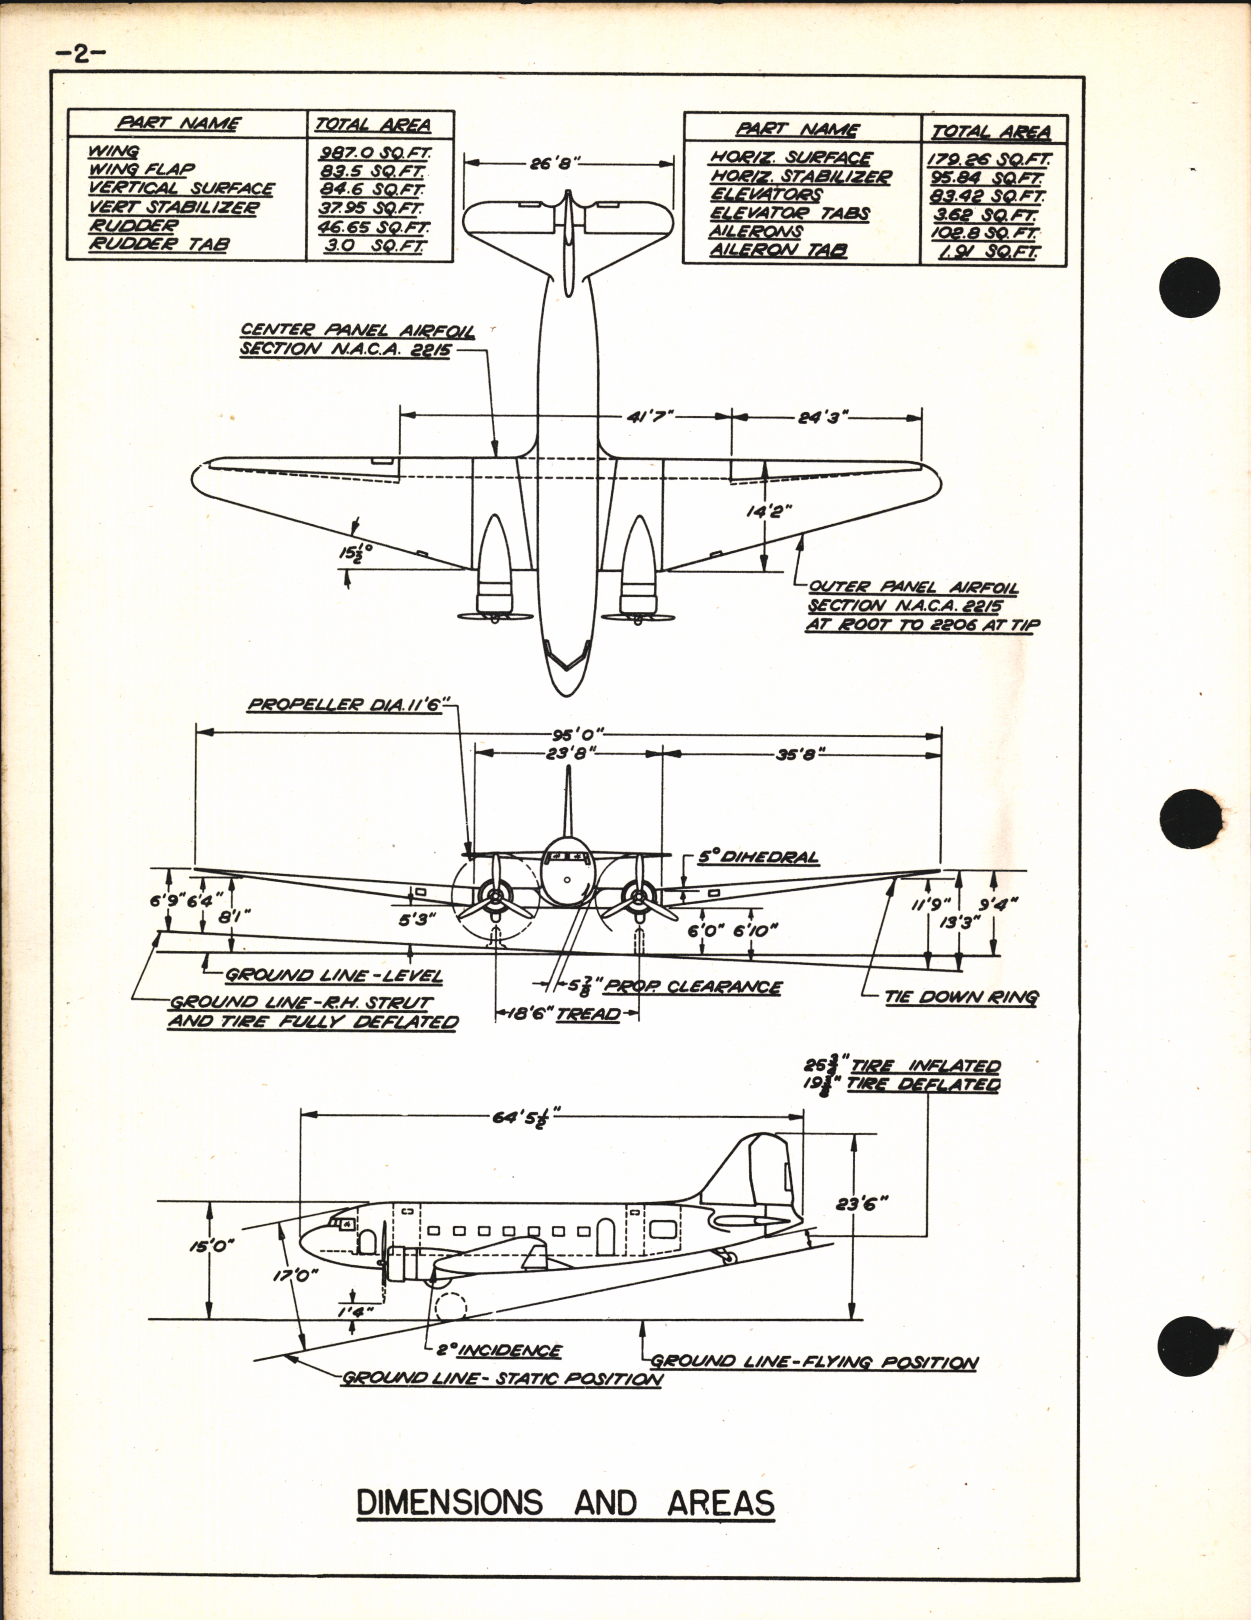 Sample page 18 from AirCorps Library document: Erection and Maintenance Inst for C-53, C-53D, R4D-3, and Dakota II